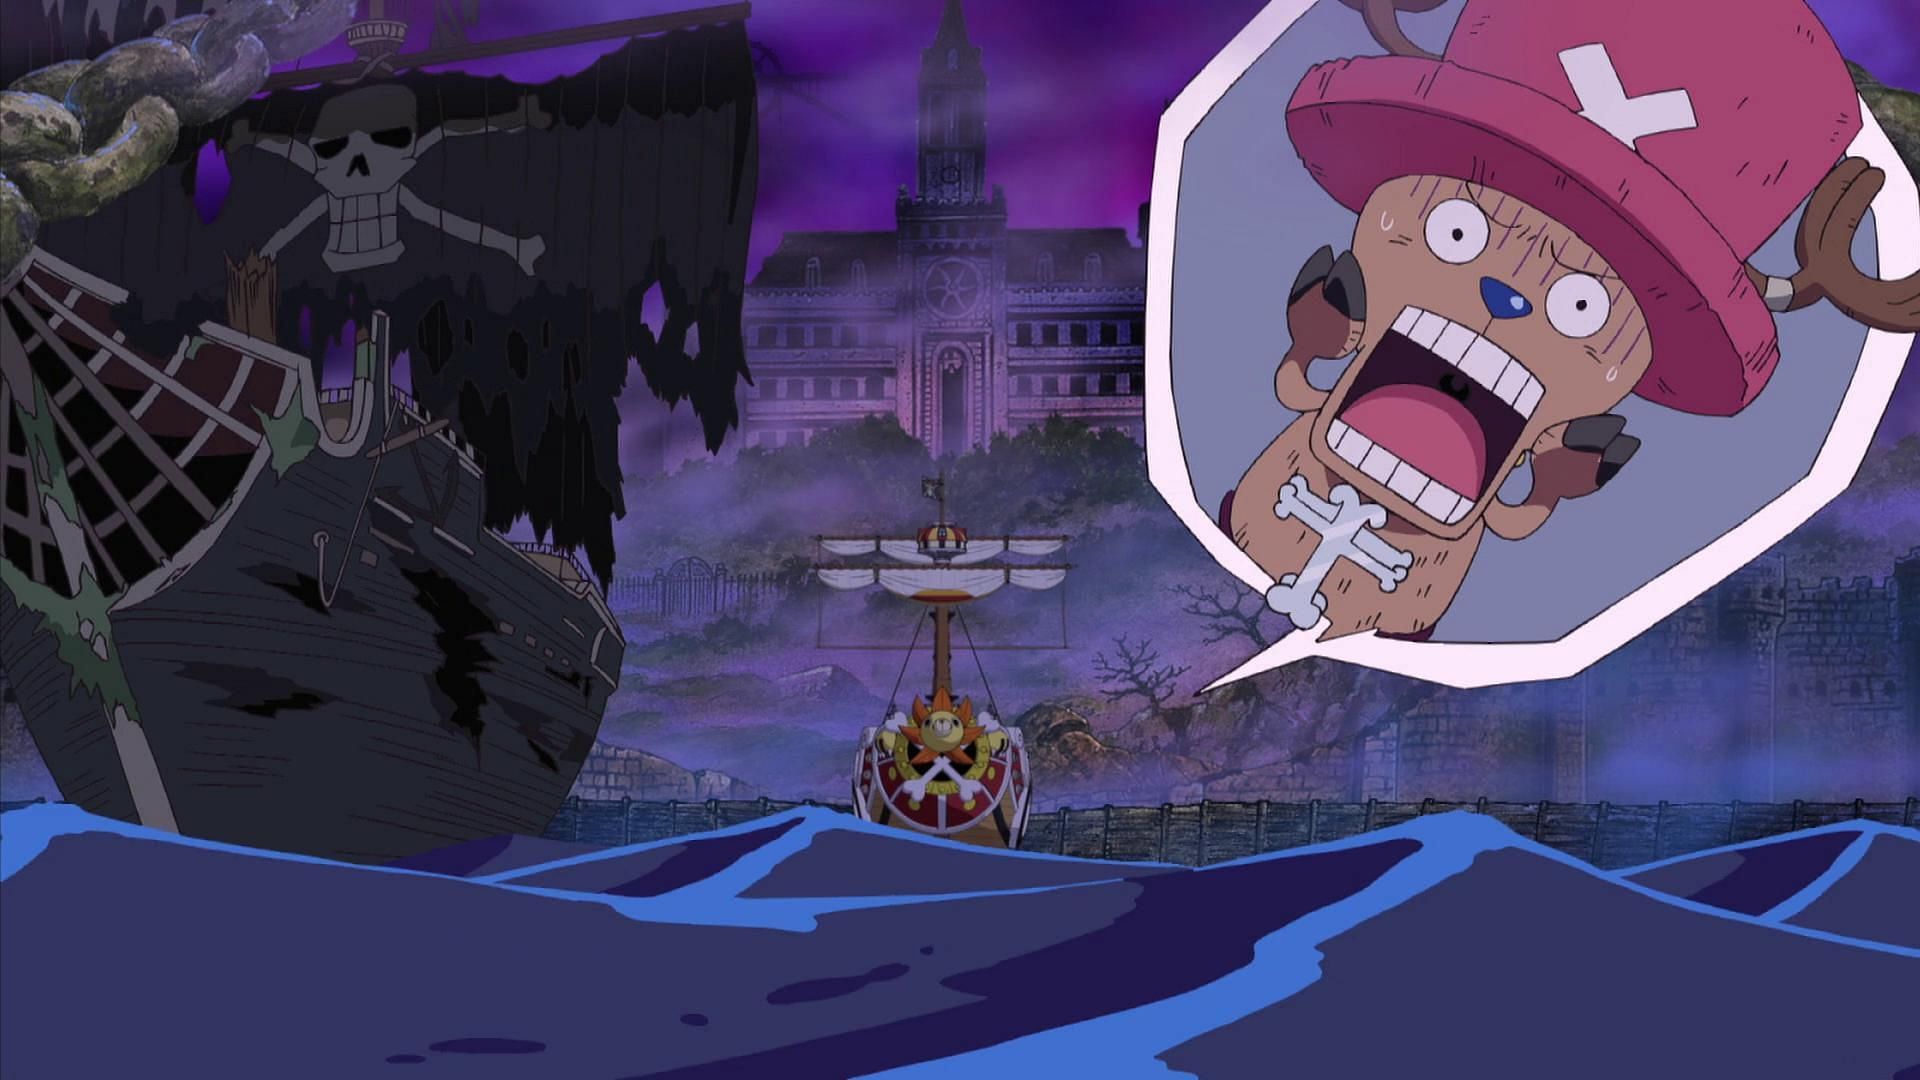 Thriller Bark is located in the Florian Triangle (Image via Toei Animation, One Piece)